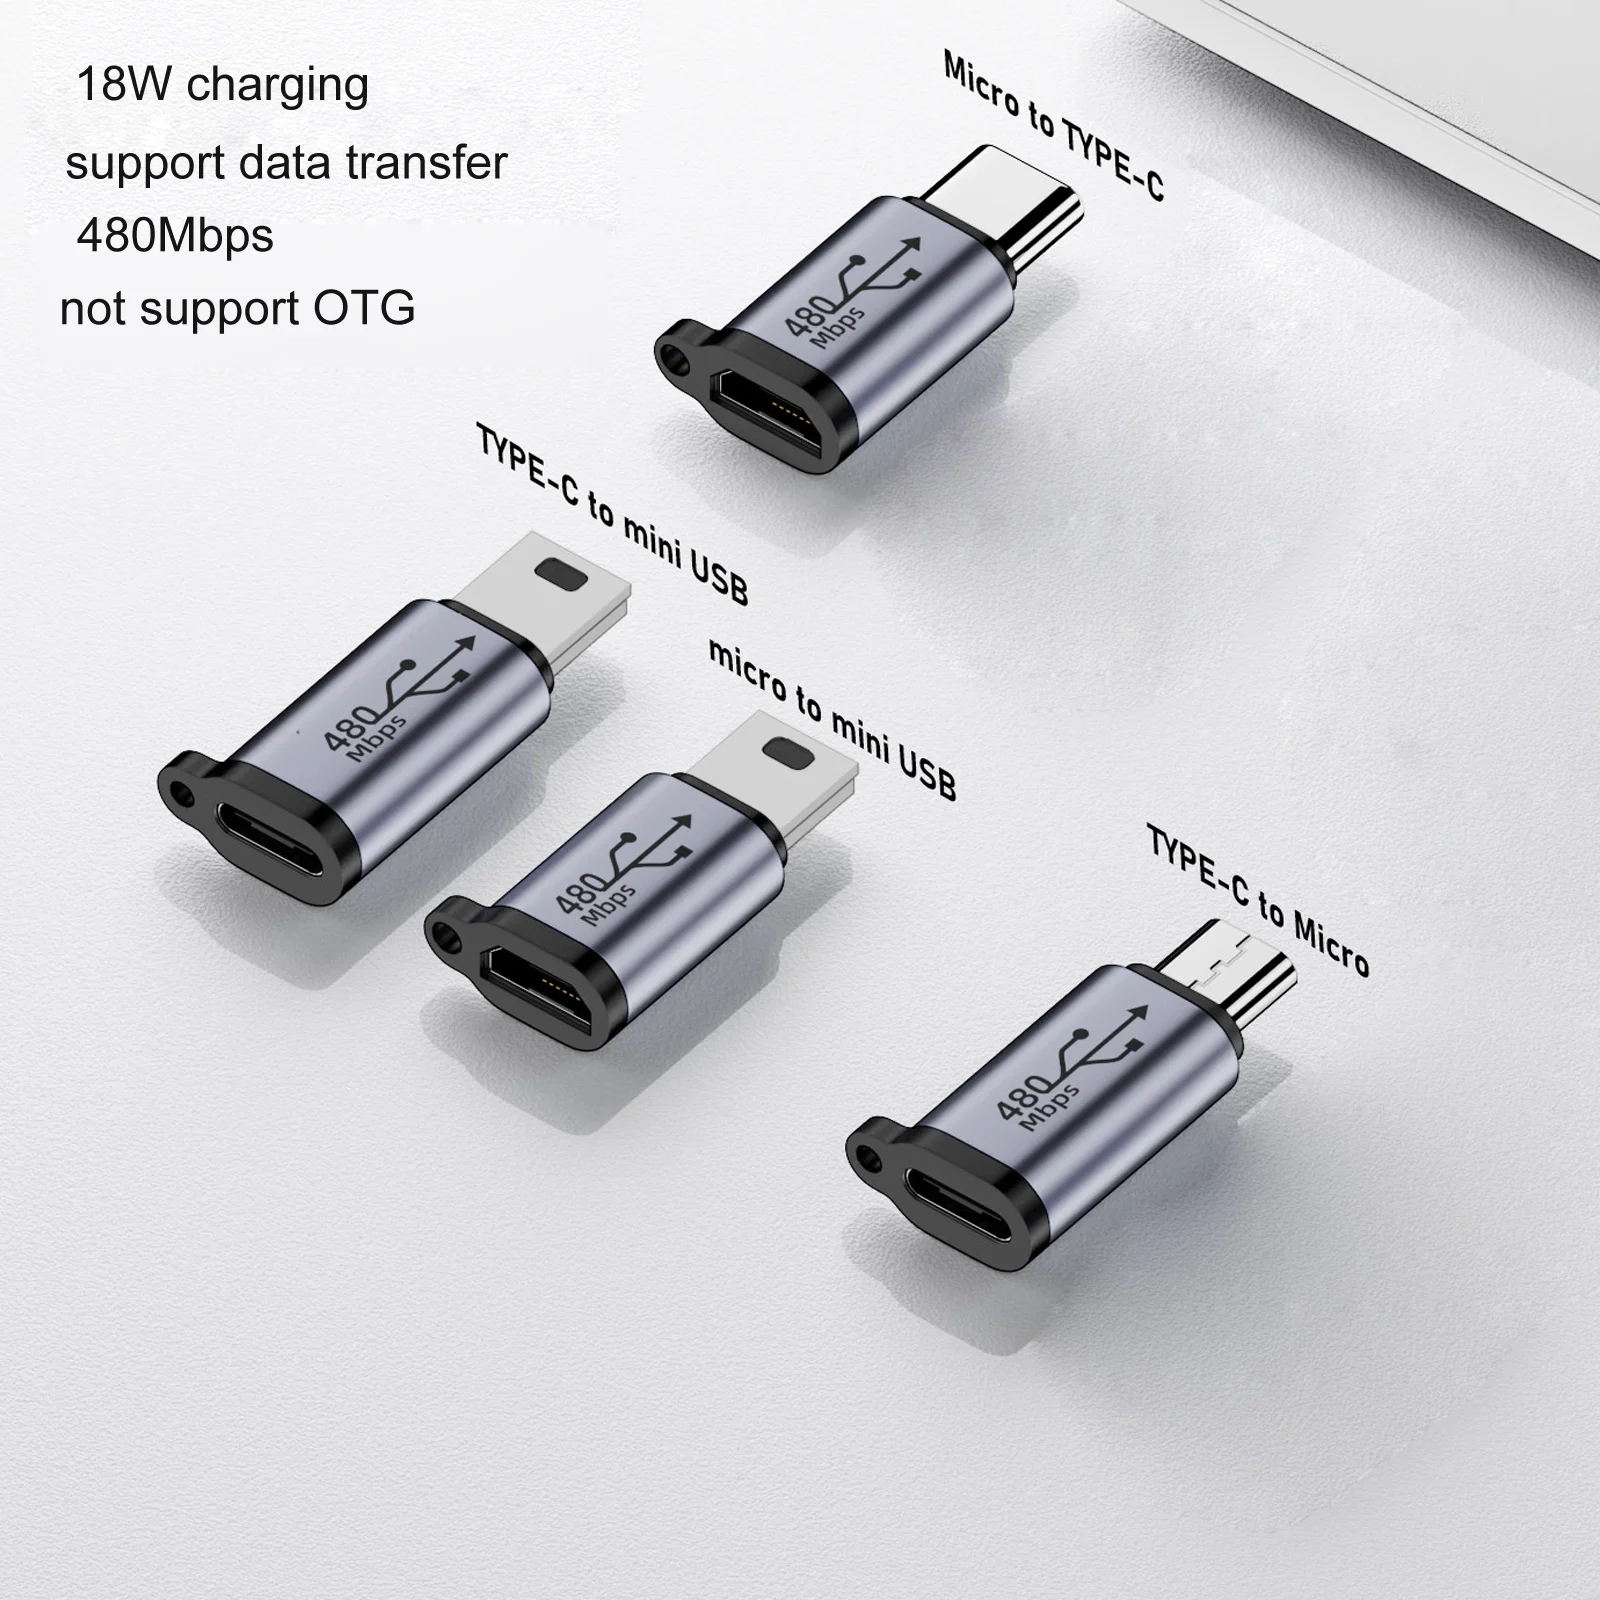 

Usb-C to Mini USB MicroUSB Adapter Micro USB to TypeC Mini USB Converter Connector Support Charge Data Sync 480Mbps 18W Dropship